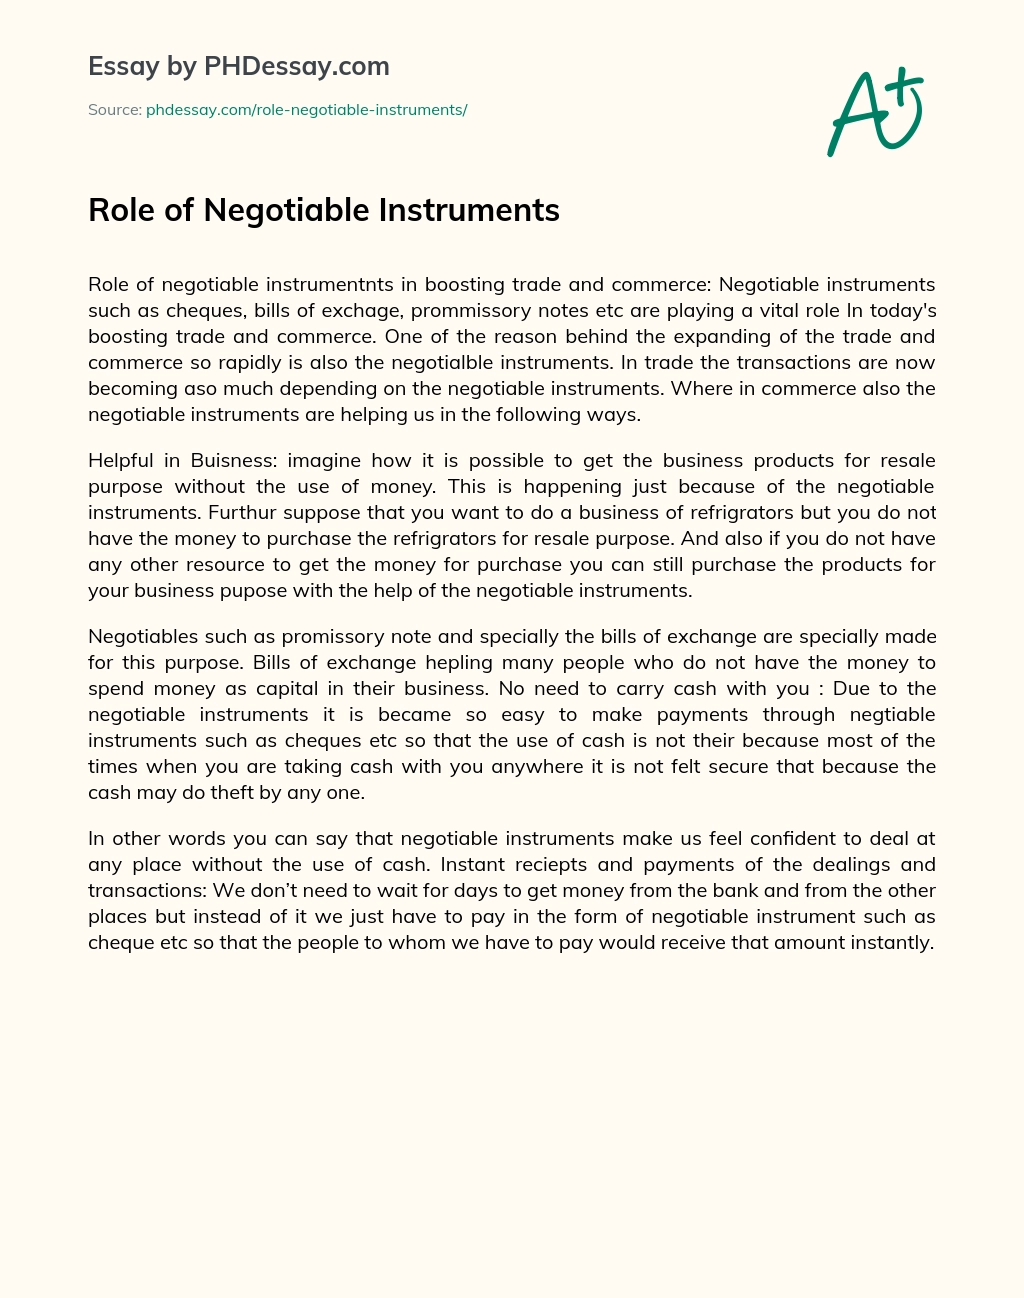 Role of Negotiable Instruments essay